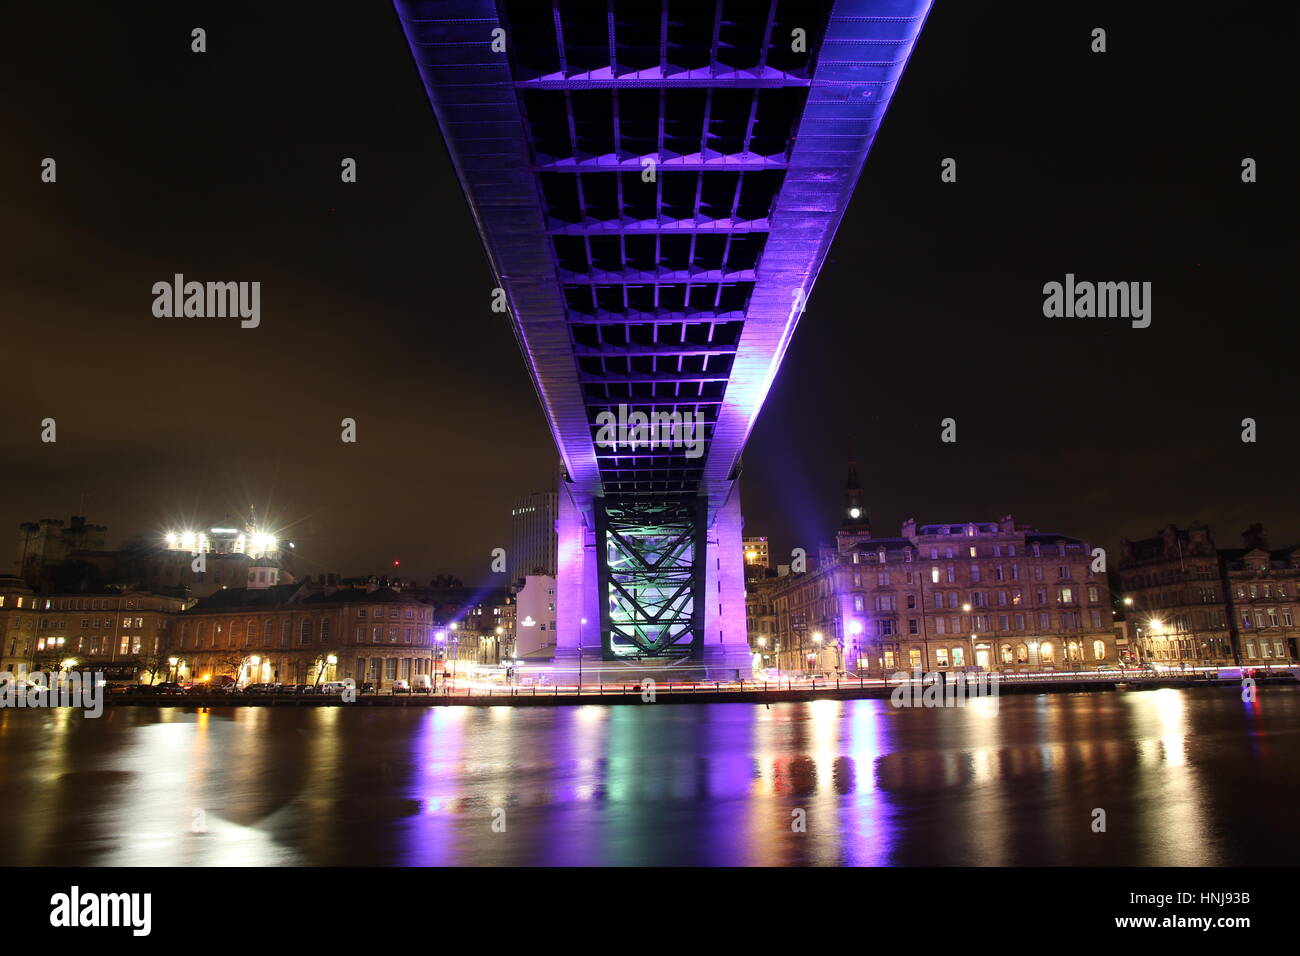 Striking view of the underside of the Tyne bridge in Newcastle-Upon-Tyne and the Quayside, both brightly lit Stock Photo